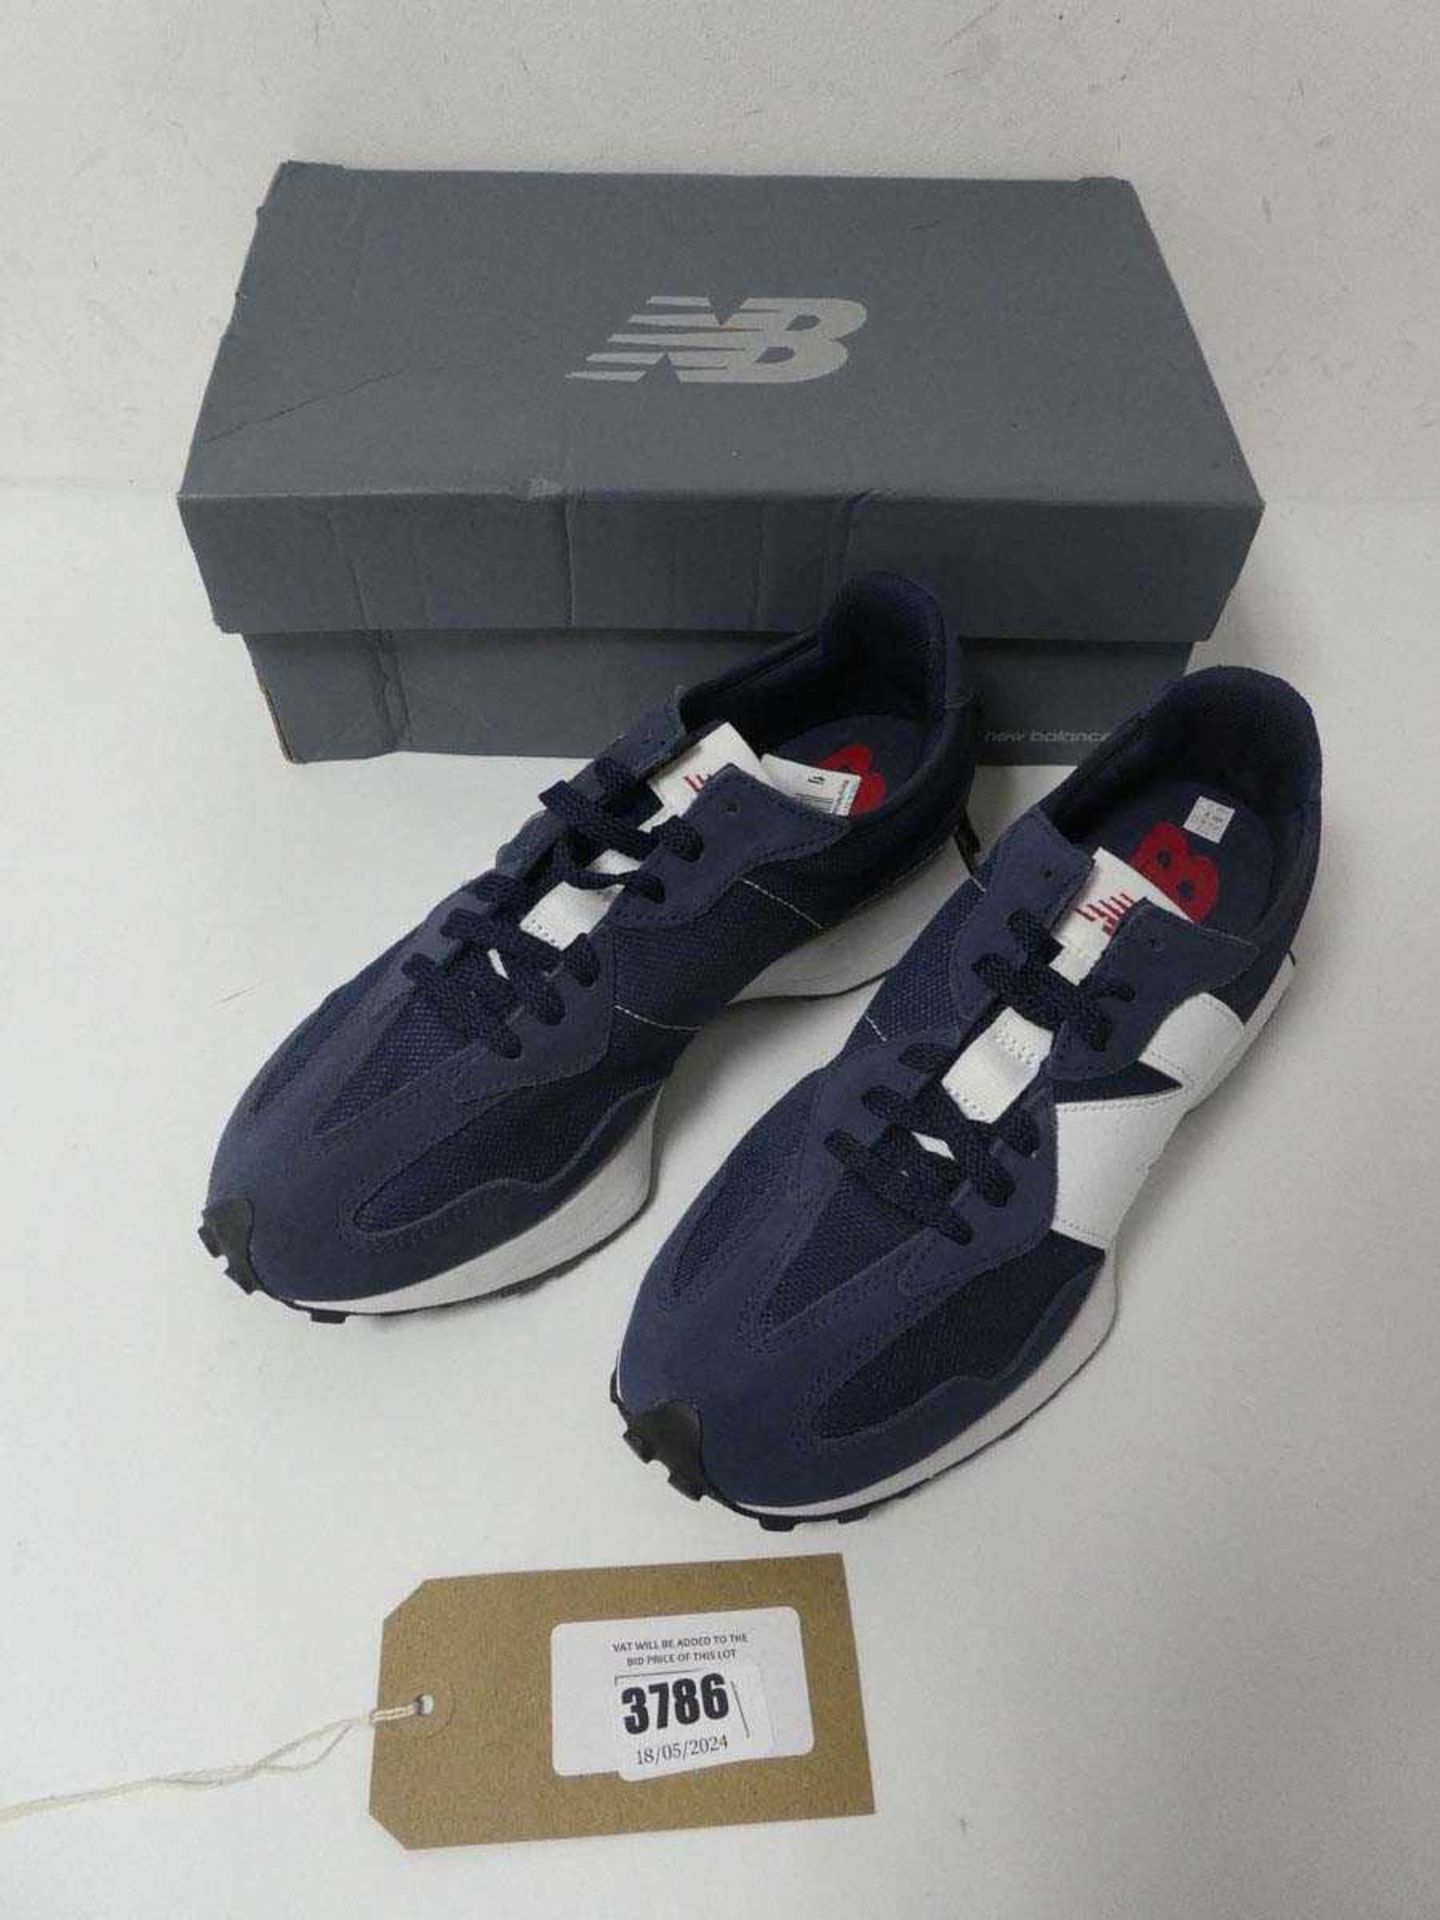 +VAT Boxed pair of New Balance trainers, navy and white UK 9